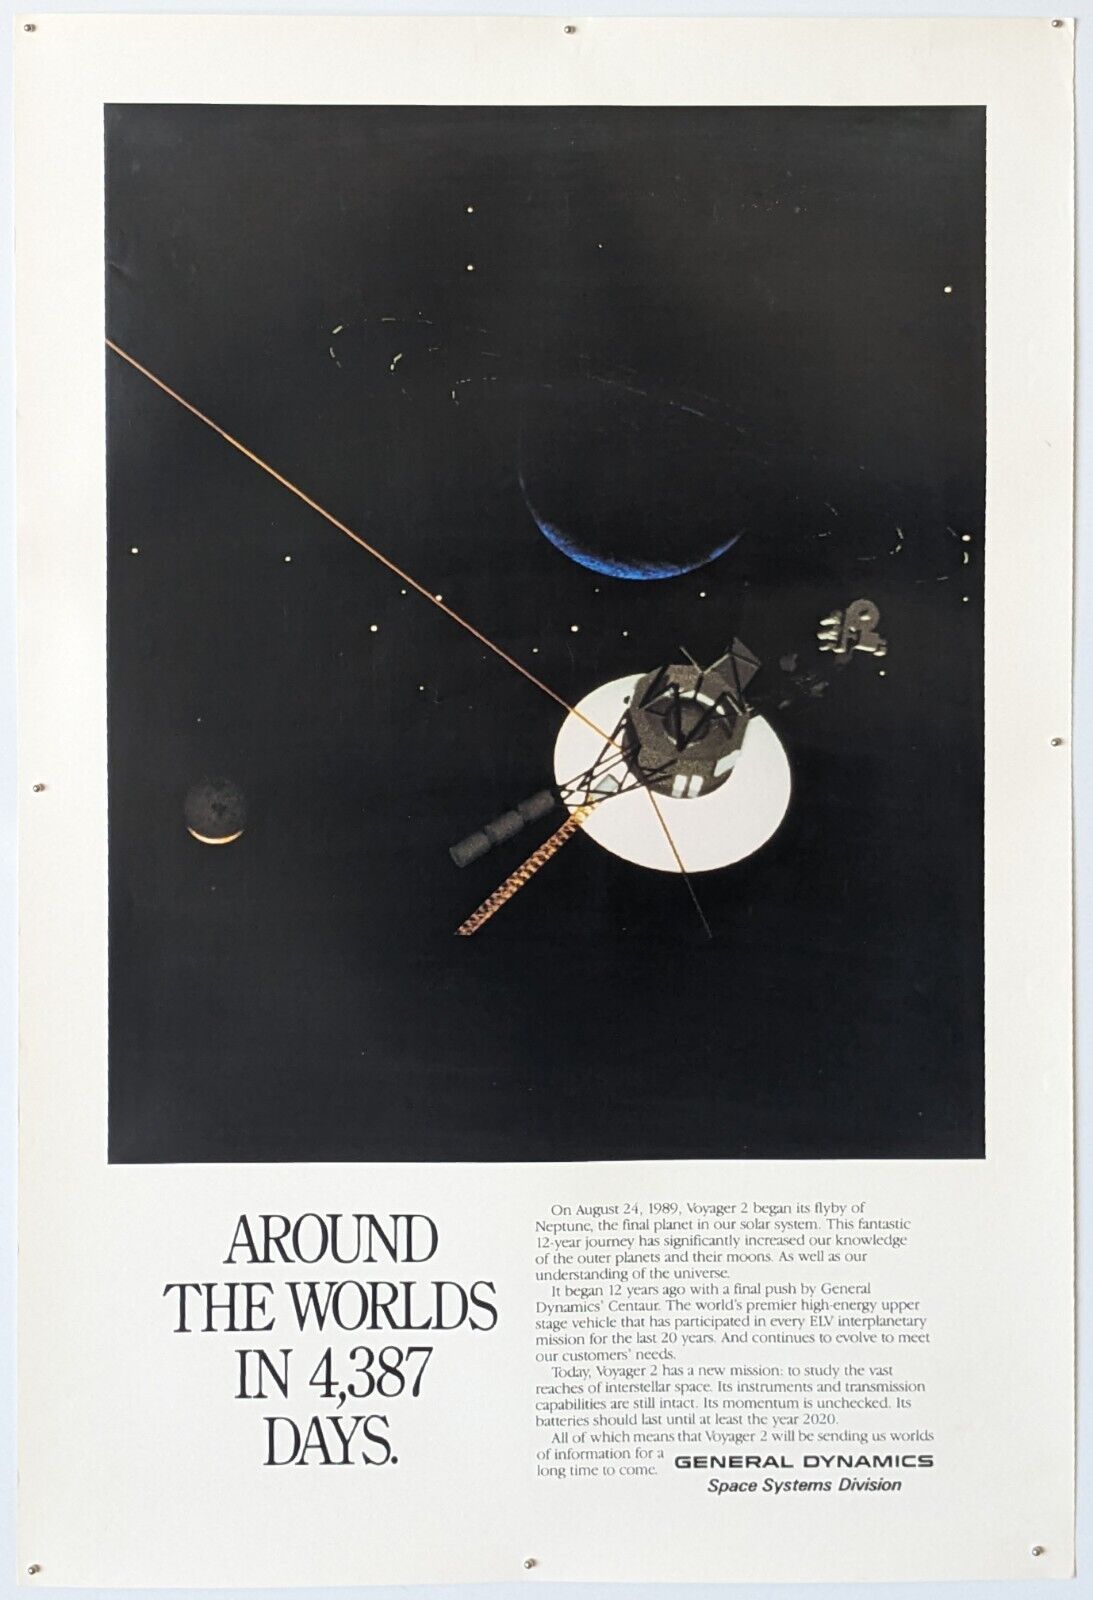 Vintage Voyager 2 General Dynamics Space Systems AROUND THE WORLDS Poster 24x36